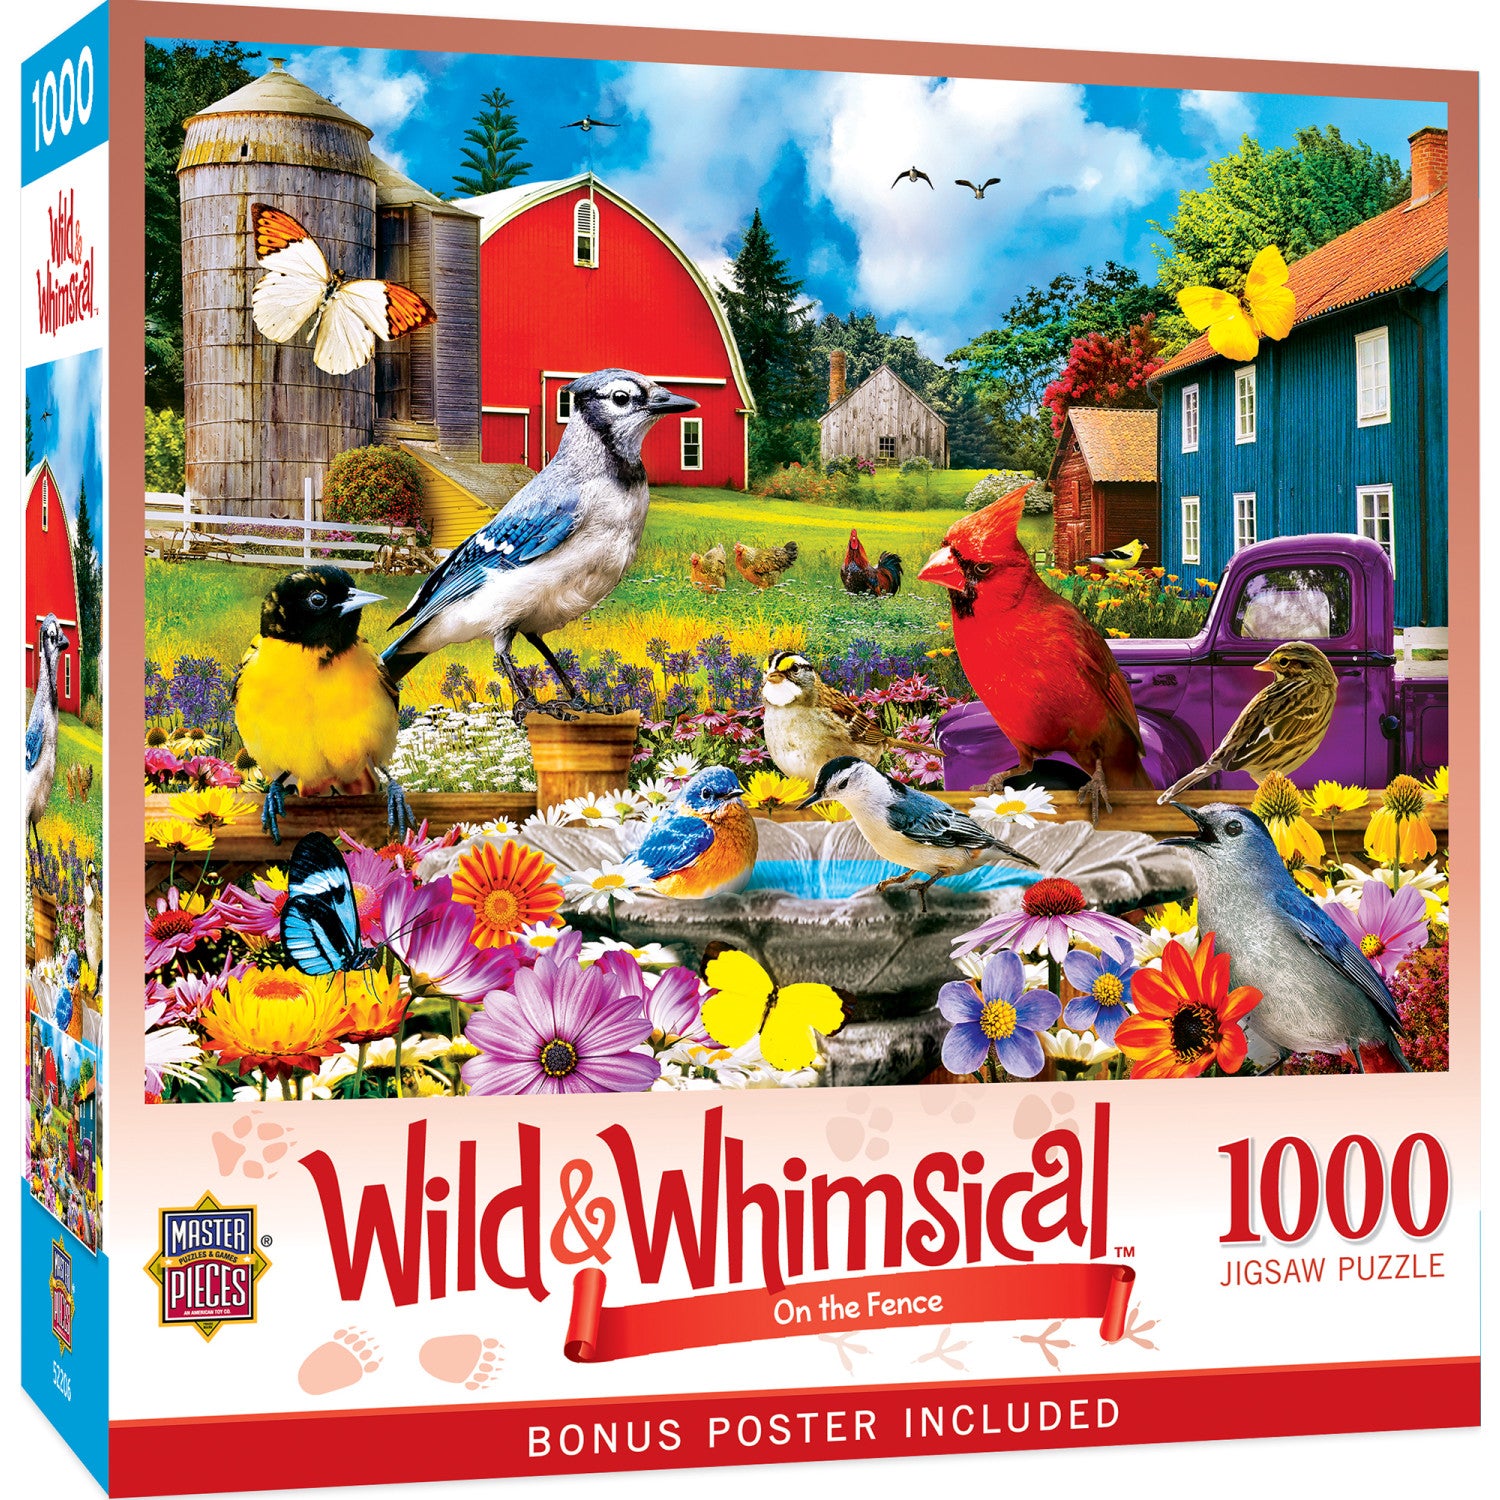 Wild & Whimsical - On The Fence 1000 Piece Jigsaw Puzzle